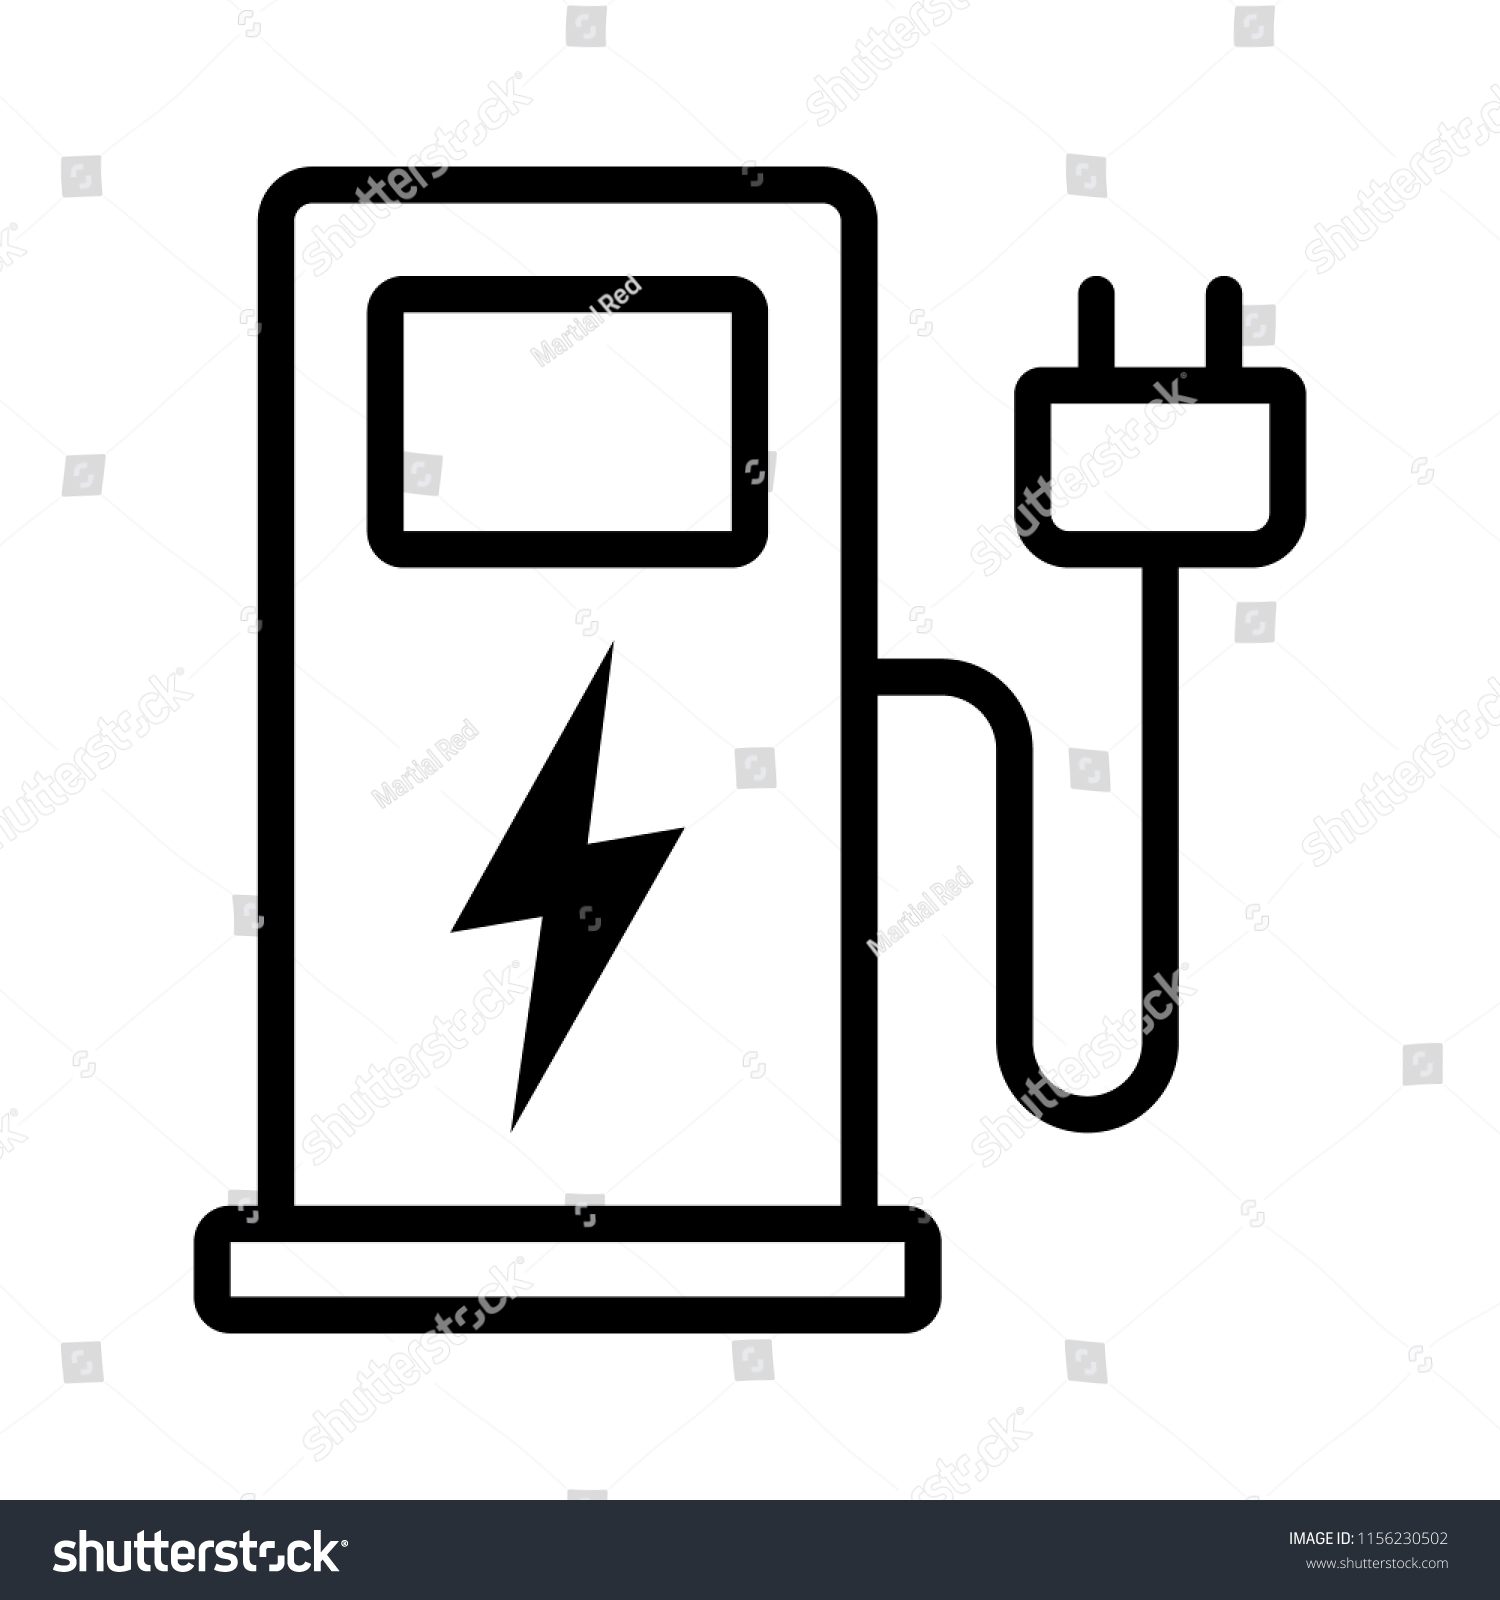 SVG of Electric vehicle charging station or EV charge point for electric vehicles / cars line art vector icon for apps and websites svg